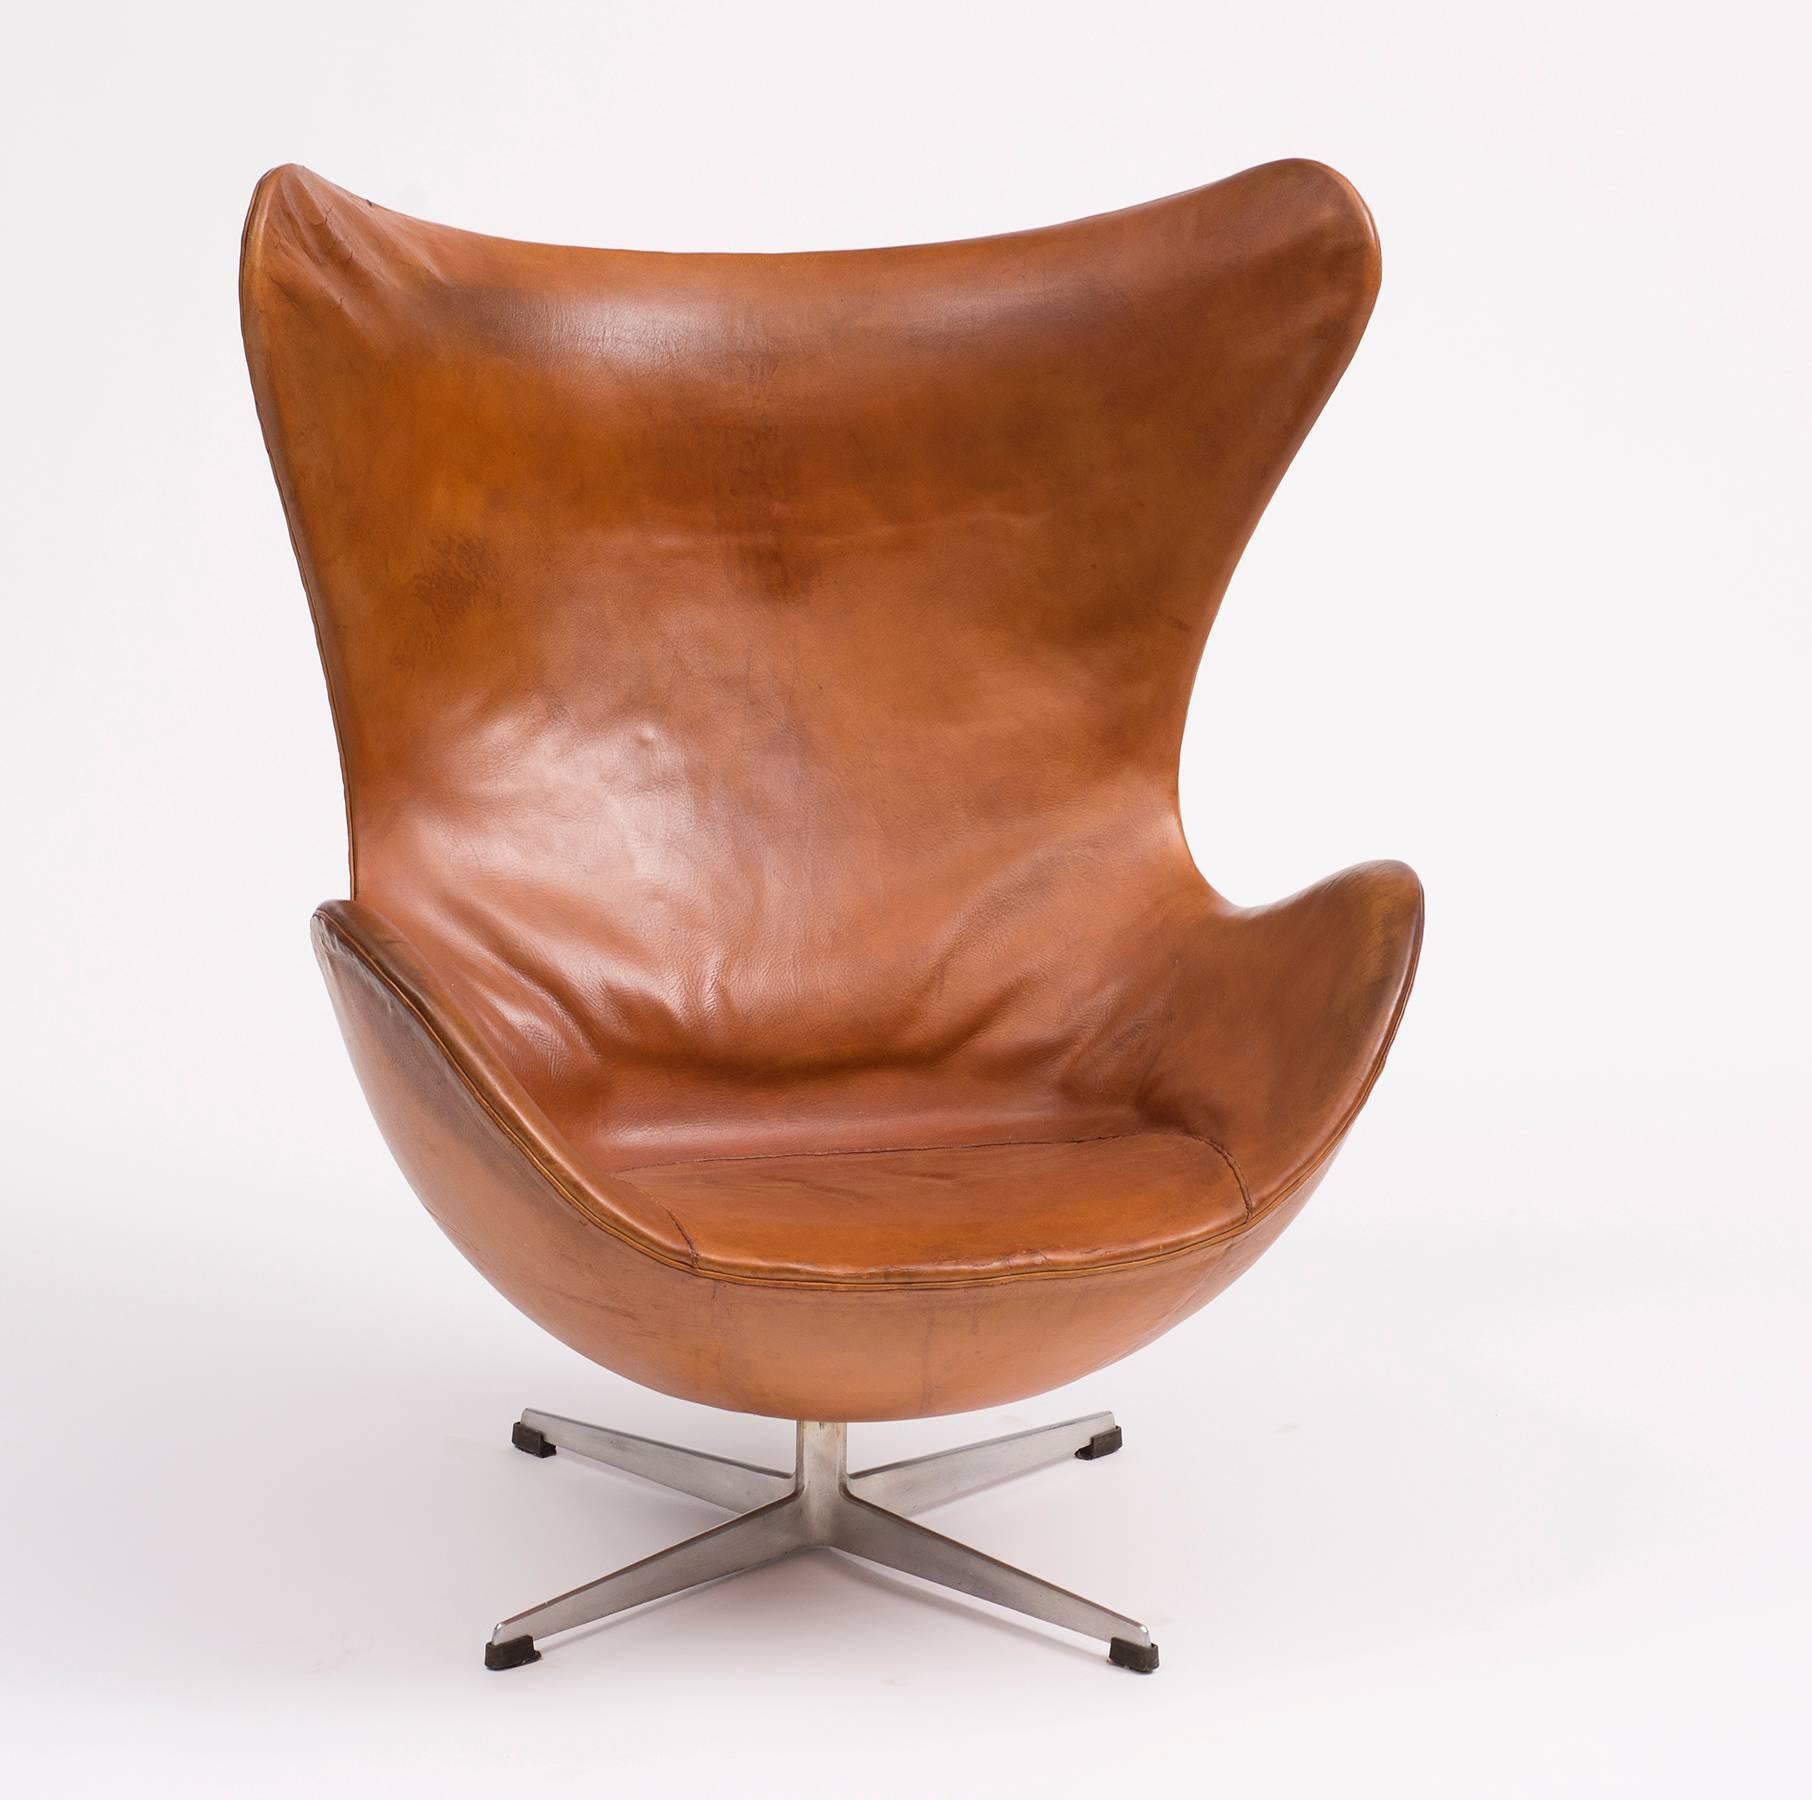 A first edition Egg chair by Arne Jacobsen in original cognac leather with lovely patina. Manufactured and stamped on underside leather by Fritz Hansen, Denmark, 1959.